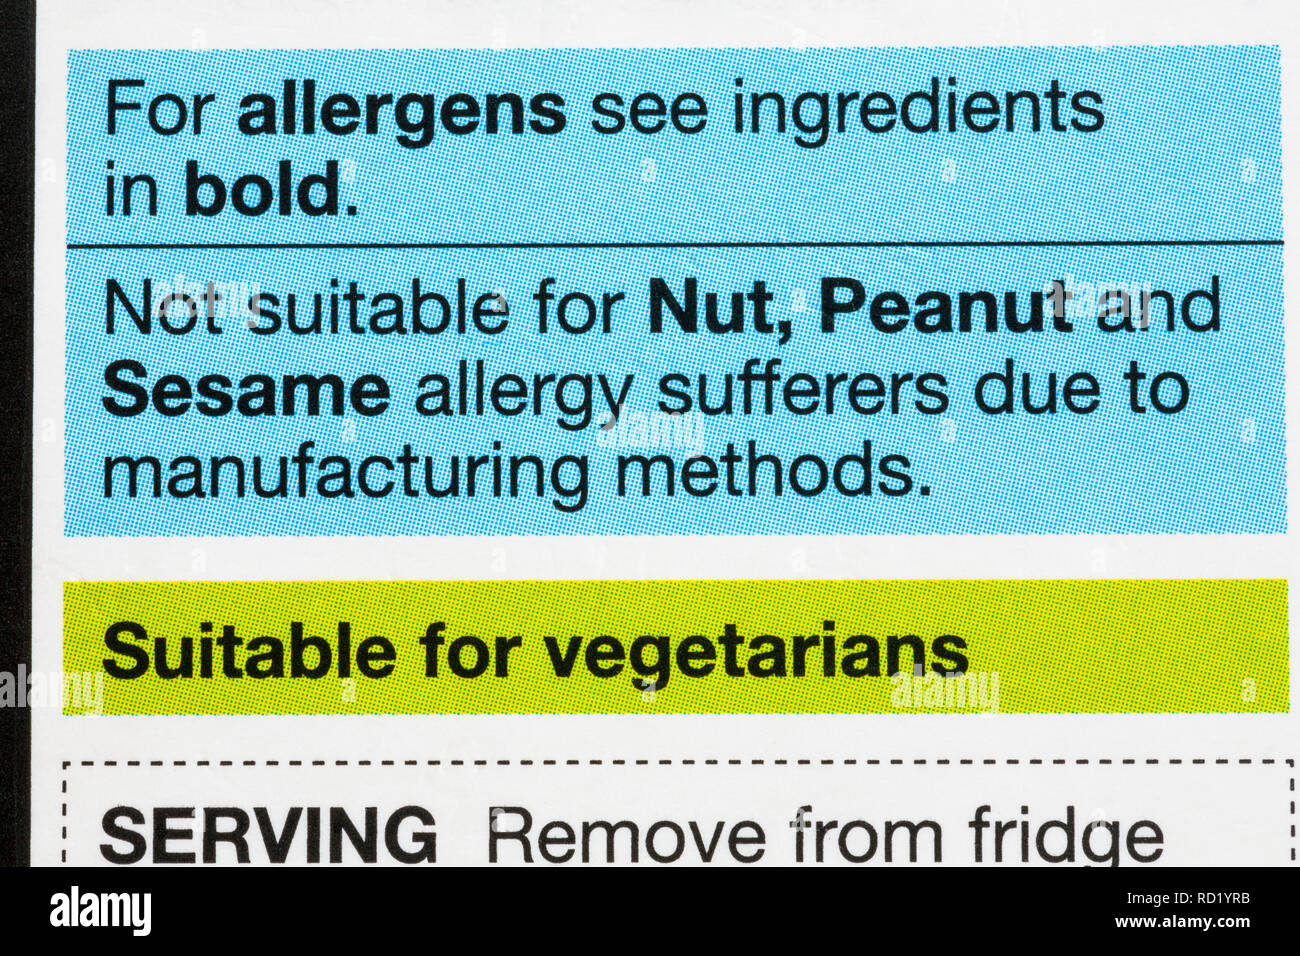 Allergens information on food packaging suitable for vegetarians Stock Photo